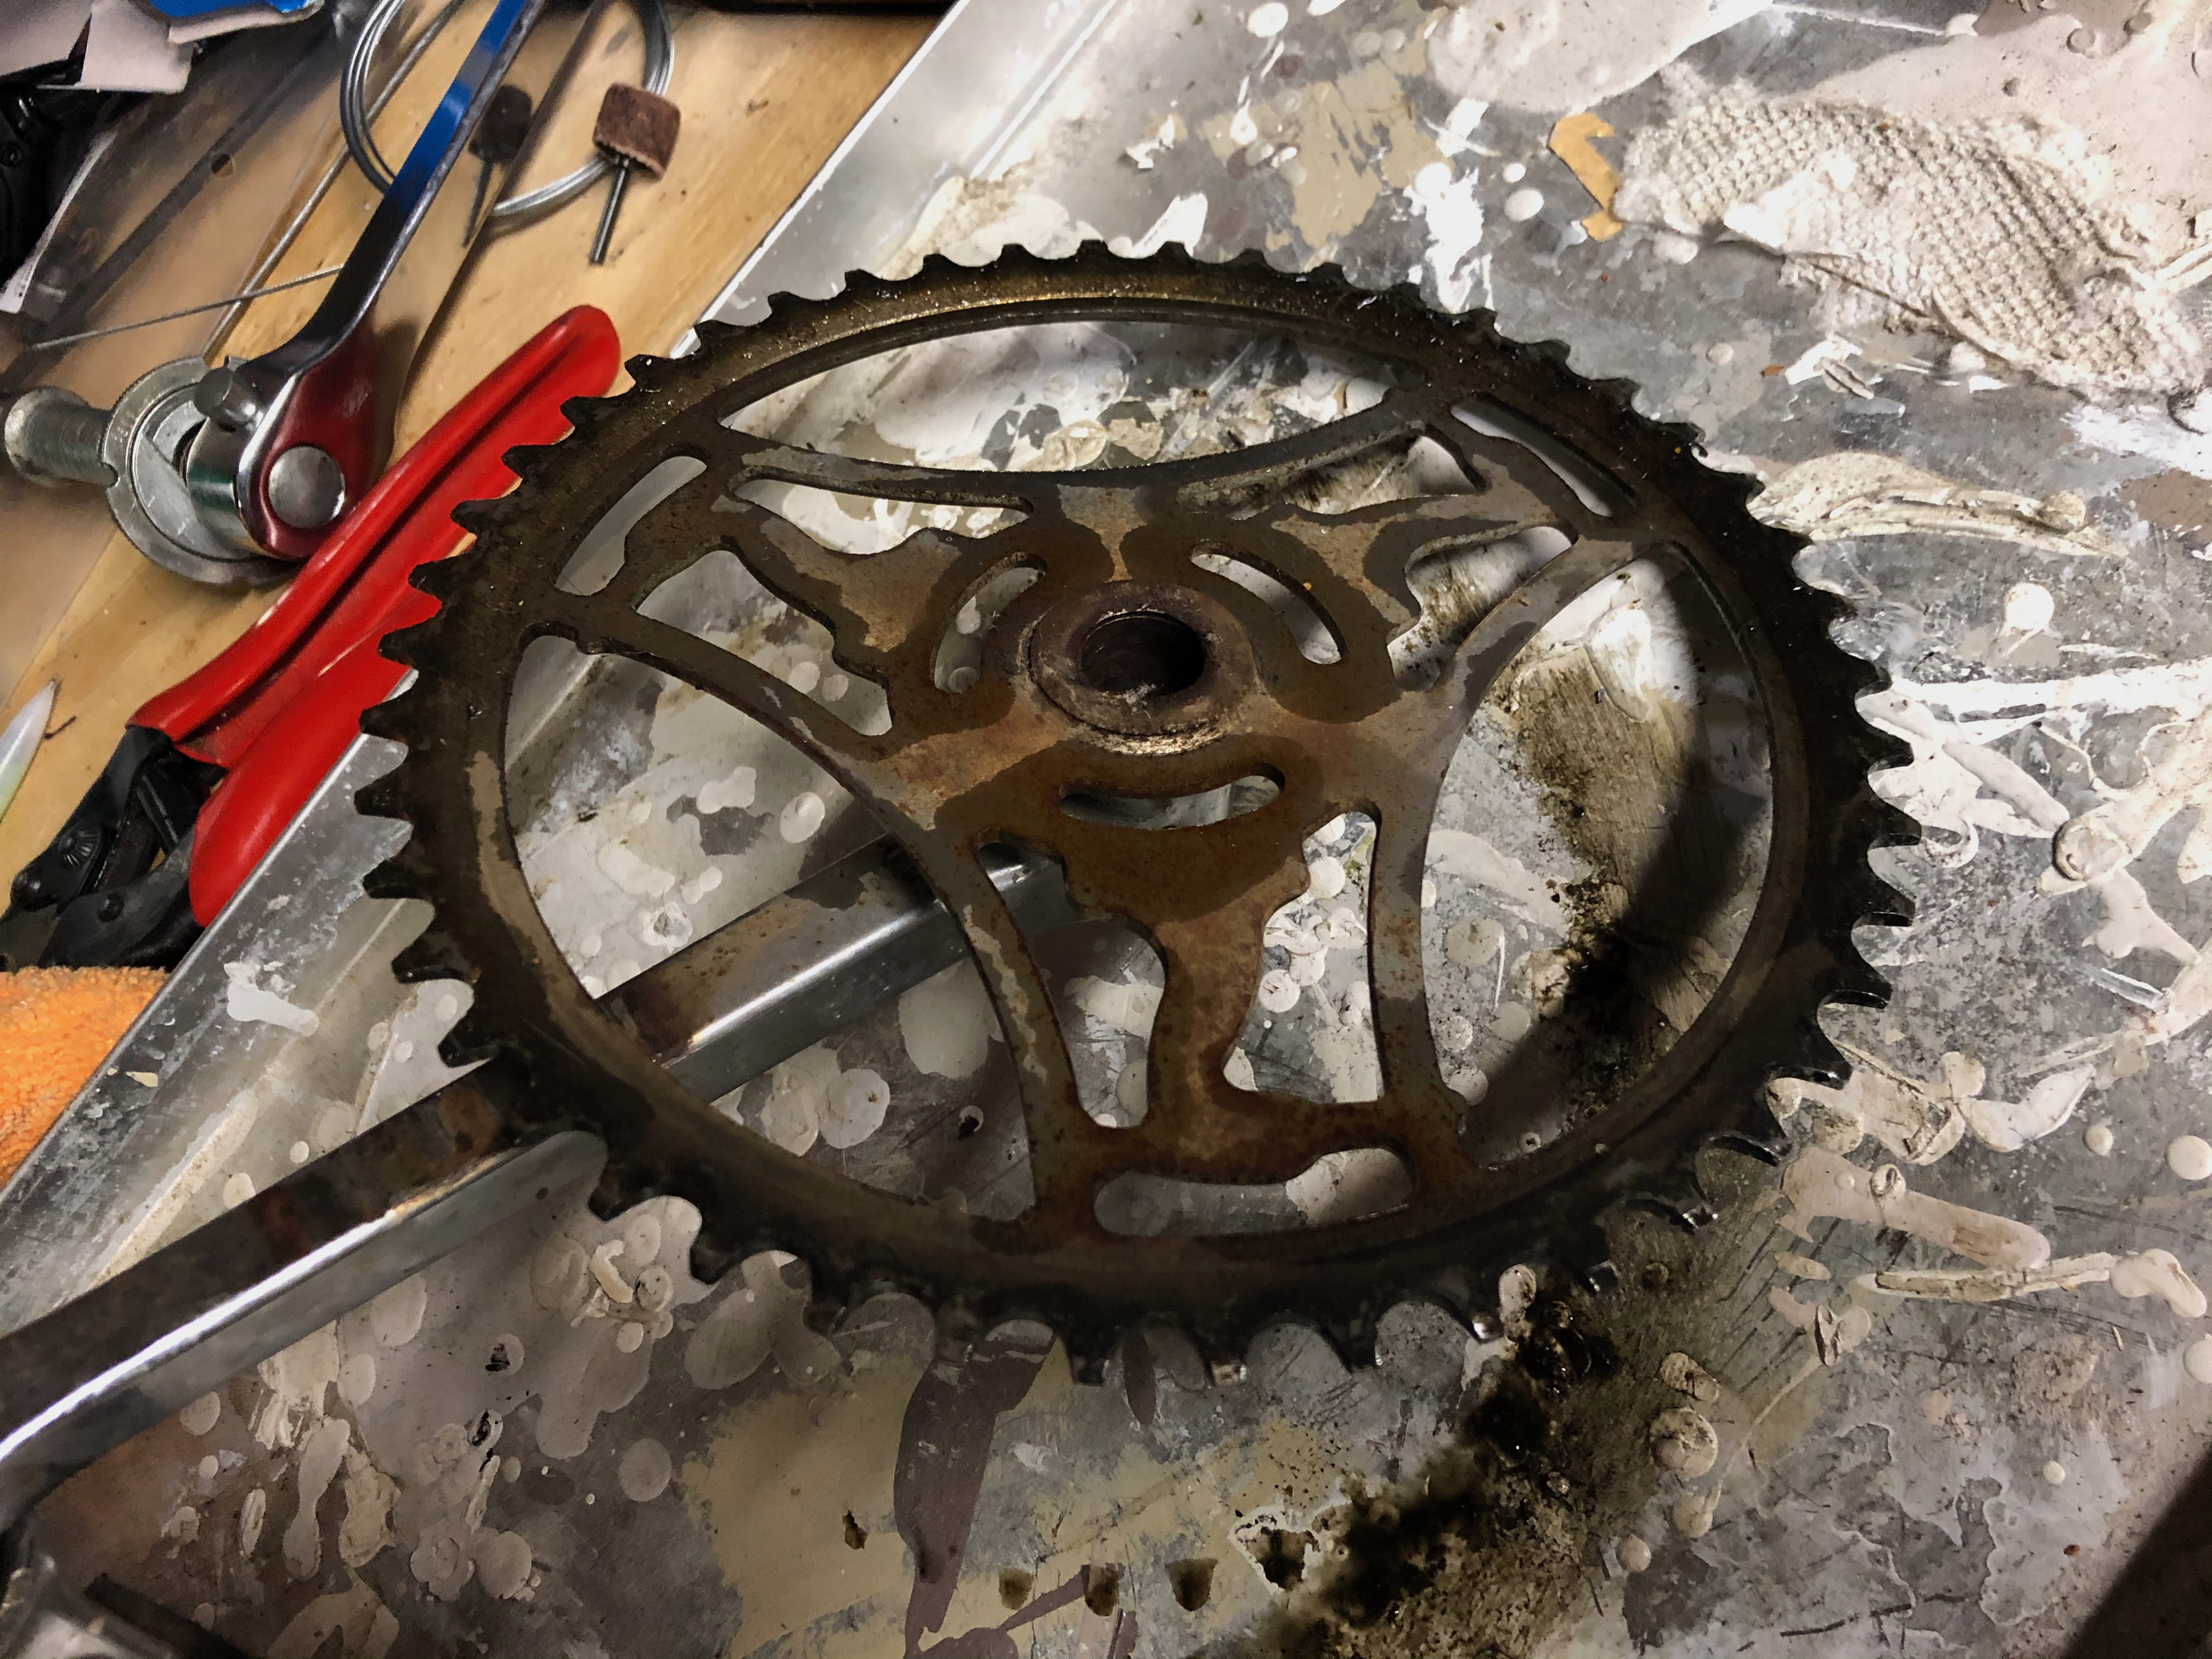 The 'heron' chainring was in pretty rough shape.